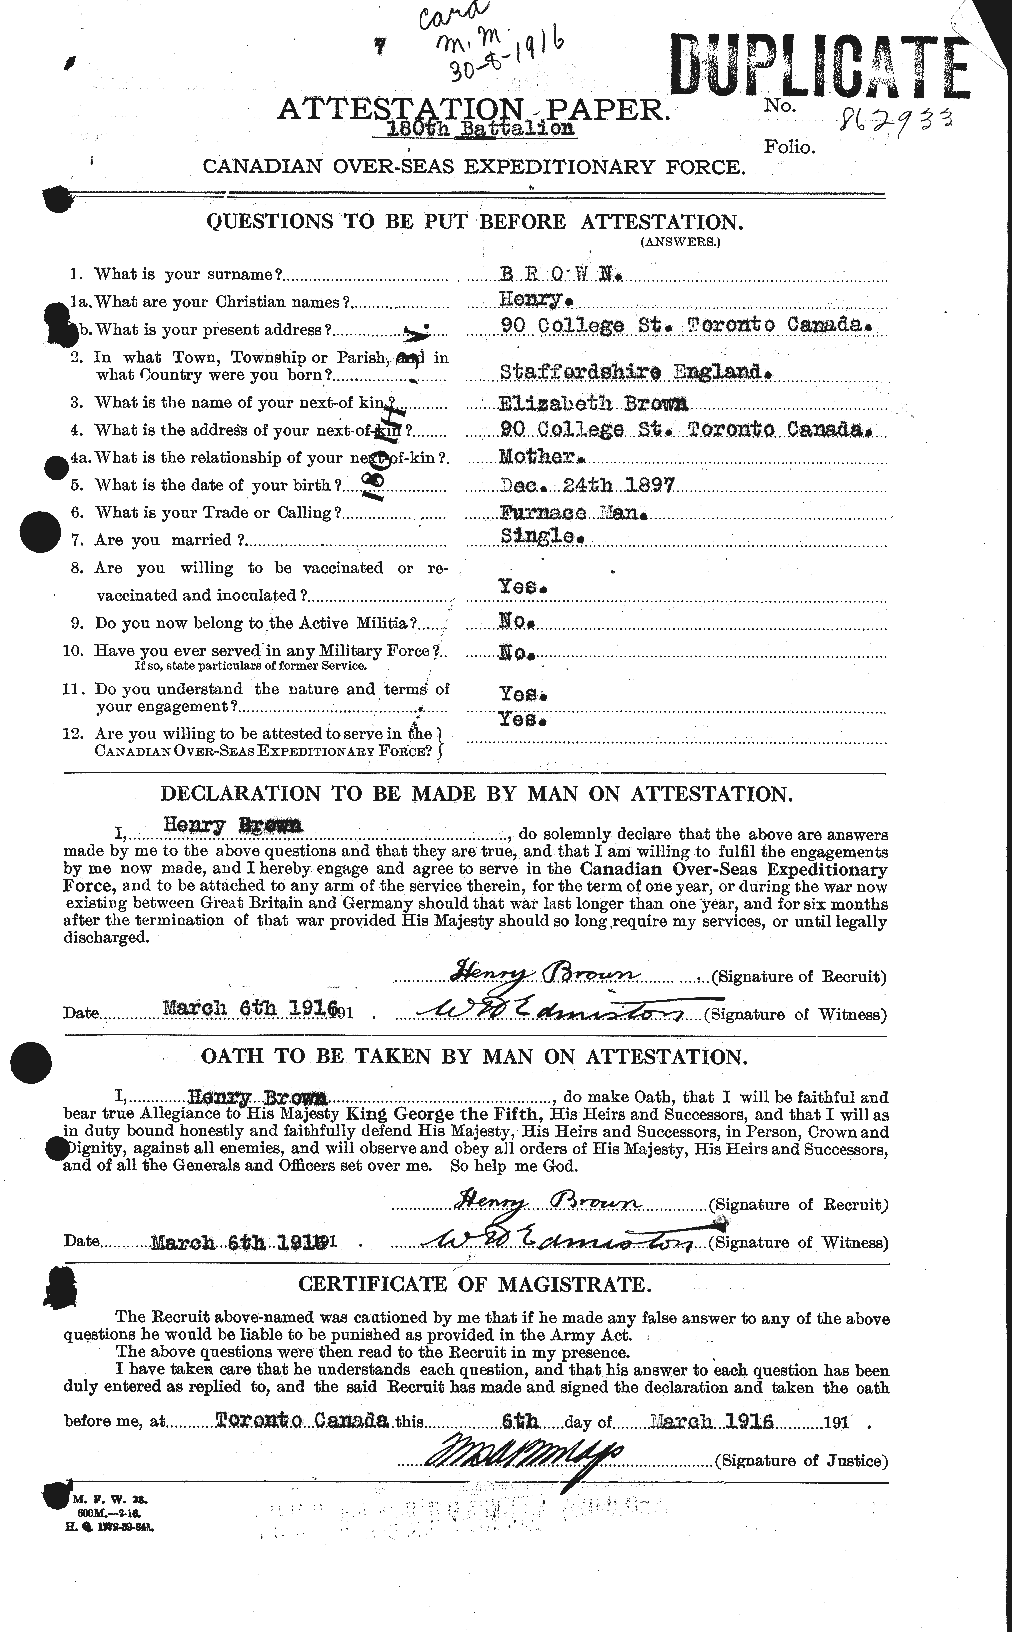 Personnel Records of the First World War - CEF 265515a